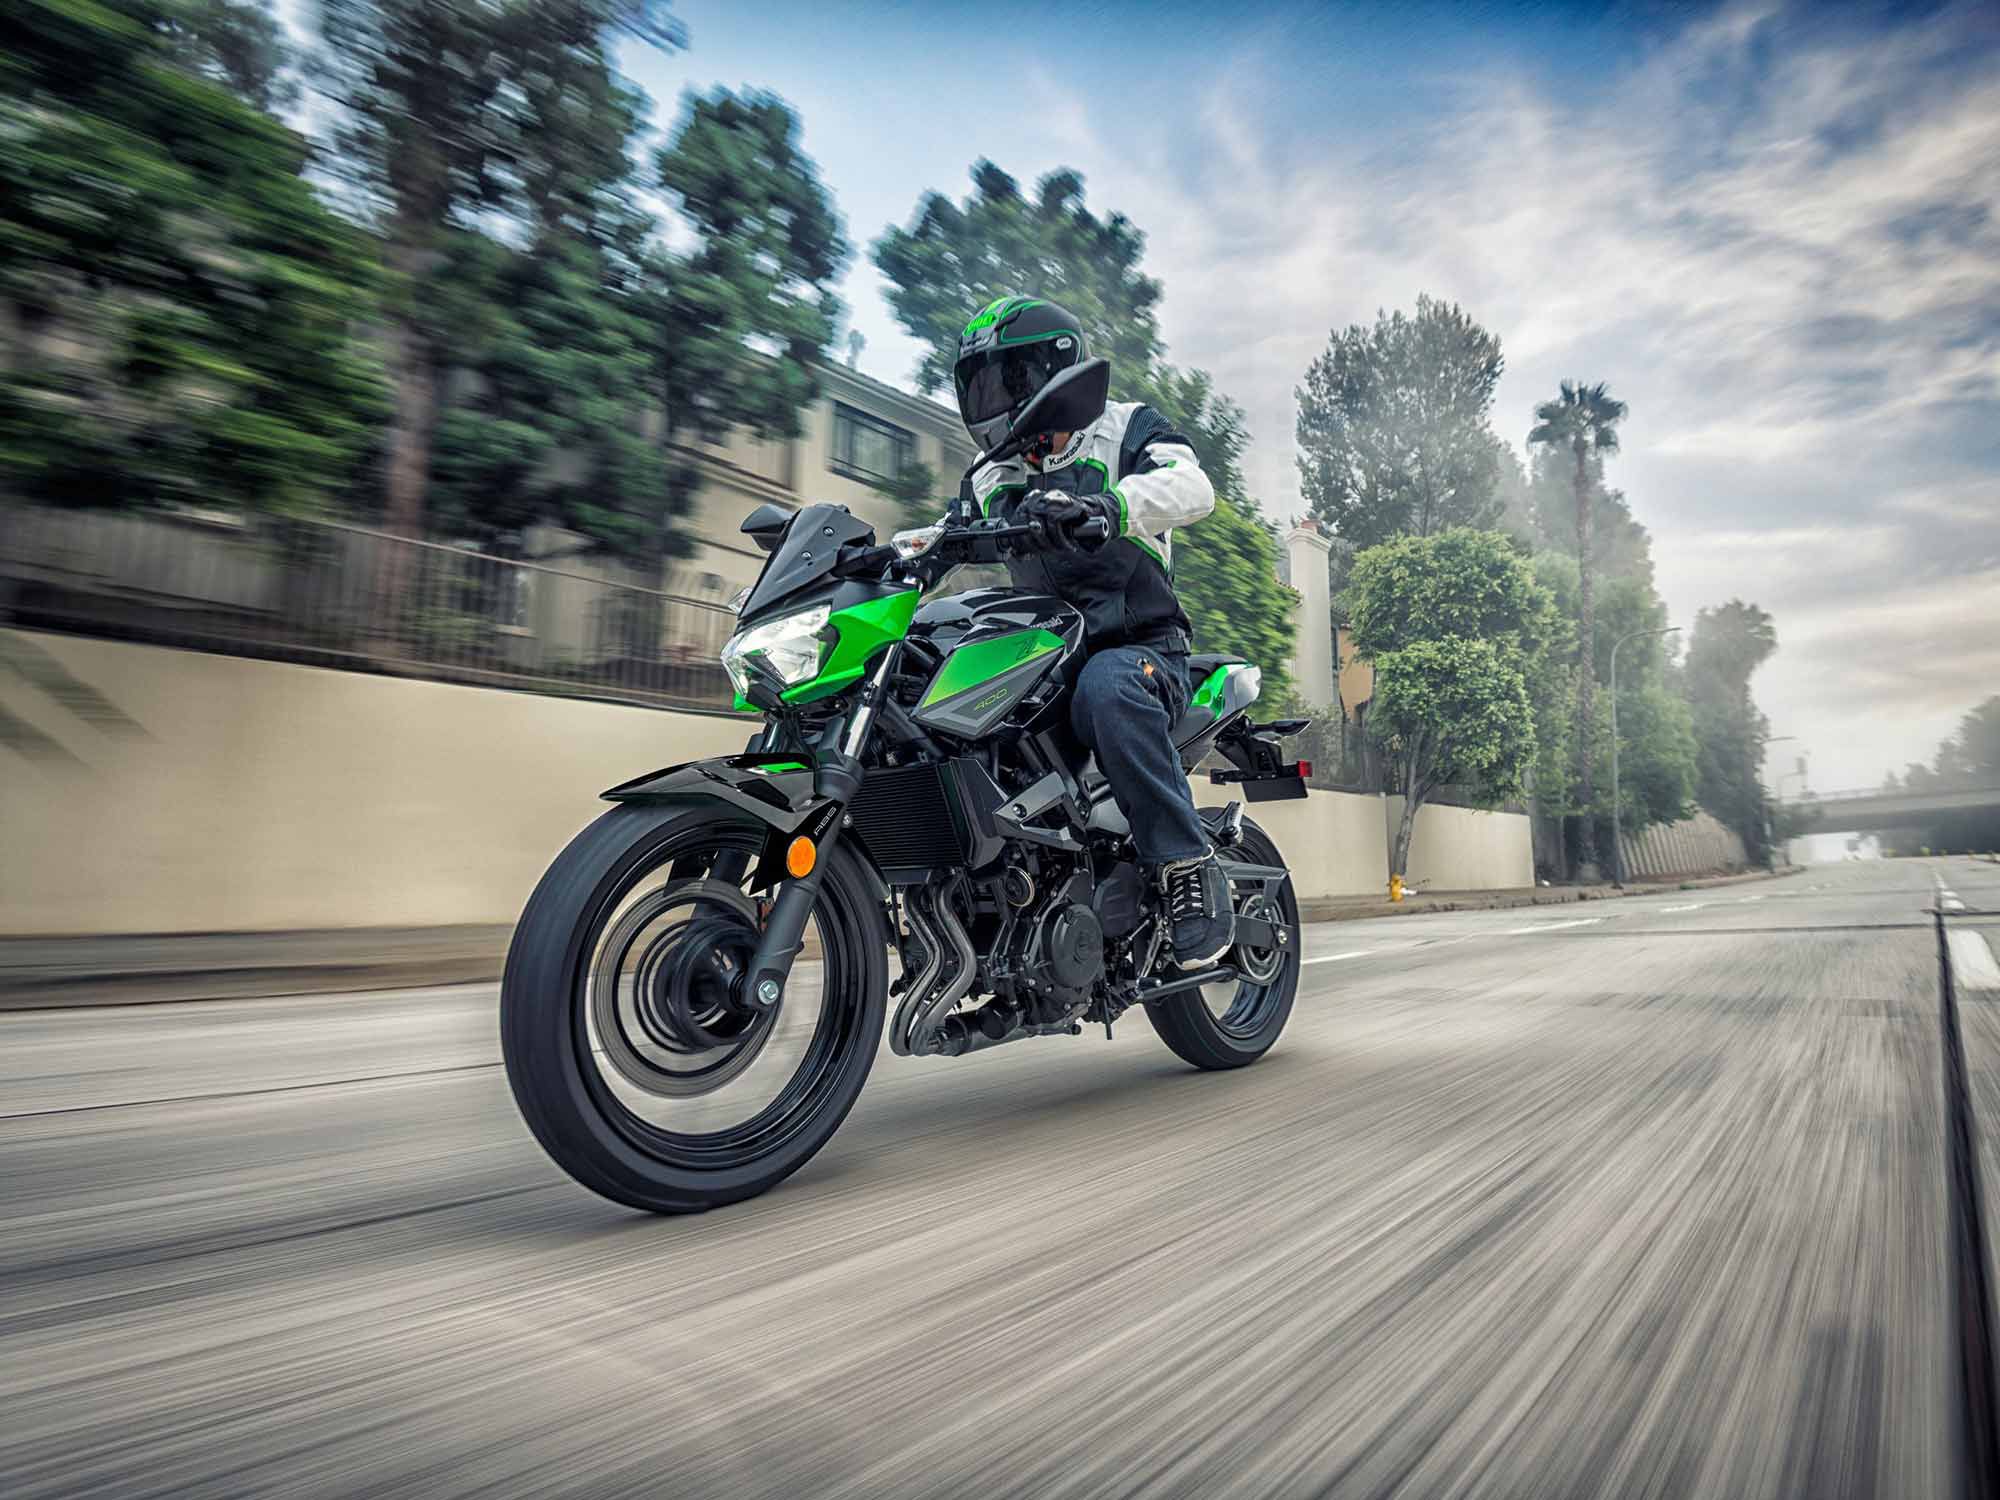 Whether taking on the open road or slicing in and out of traffic, the Z dishes out the fun.